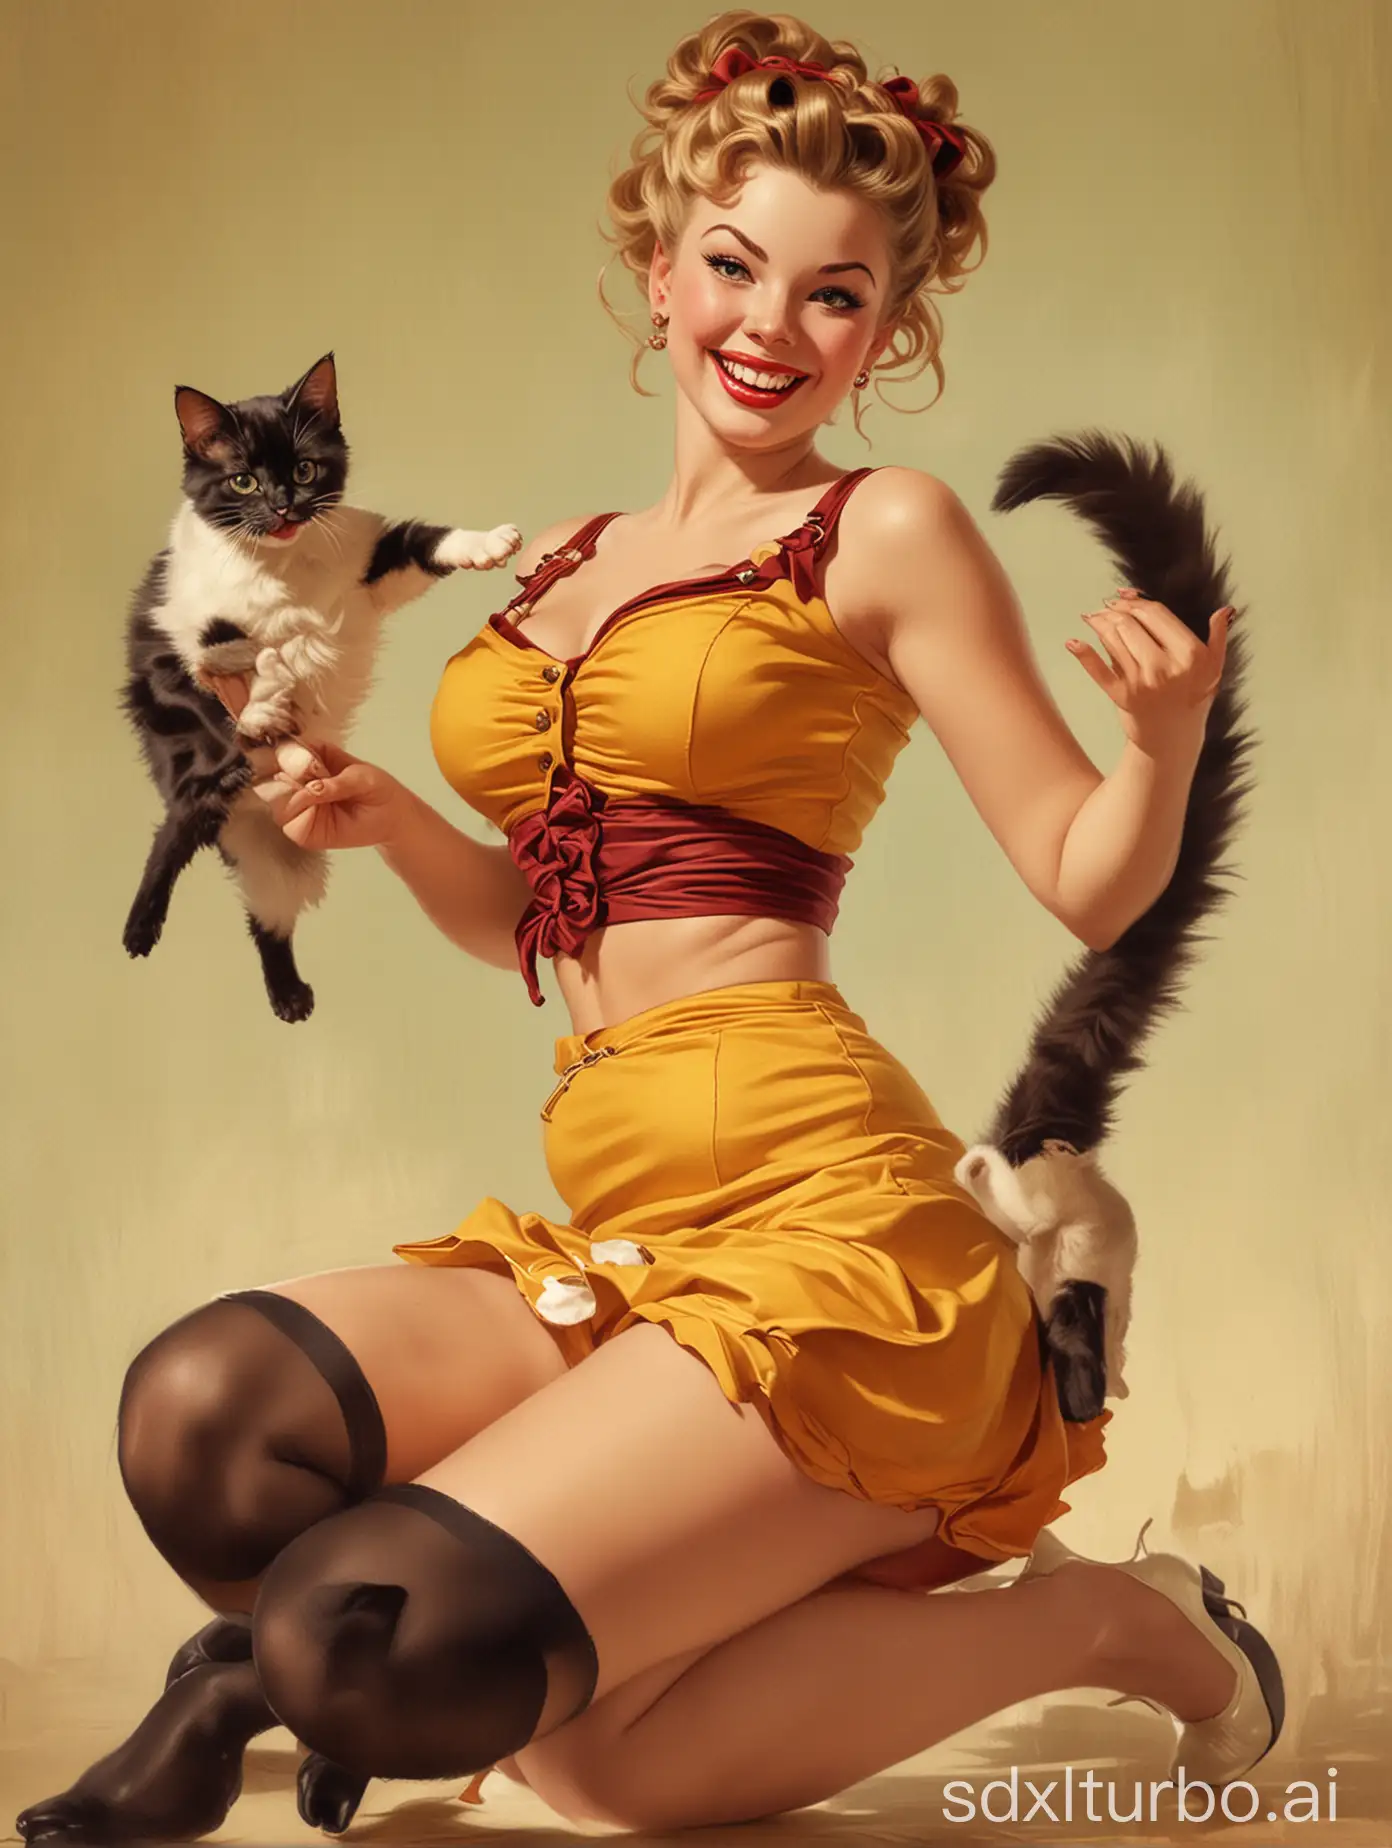 Seductive-PinUp-Art-Woman-Playing-with-Cat-in-Gil-Elvgren-Style